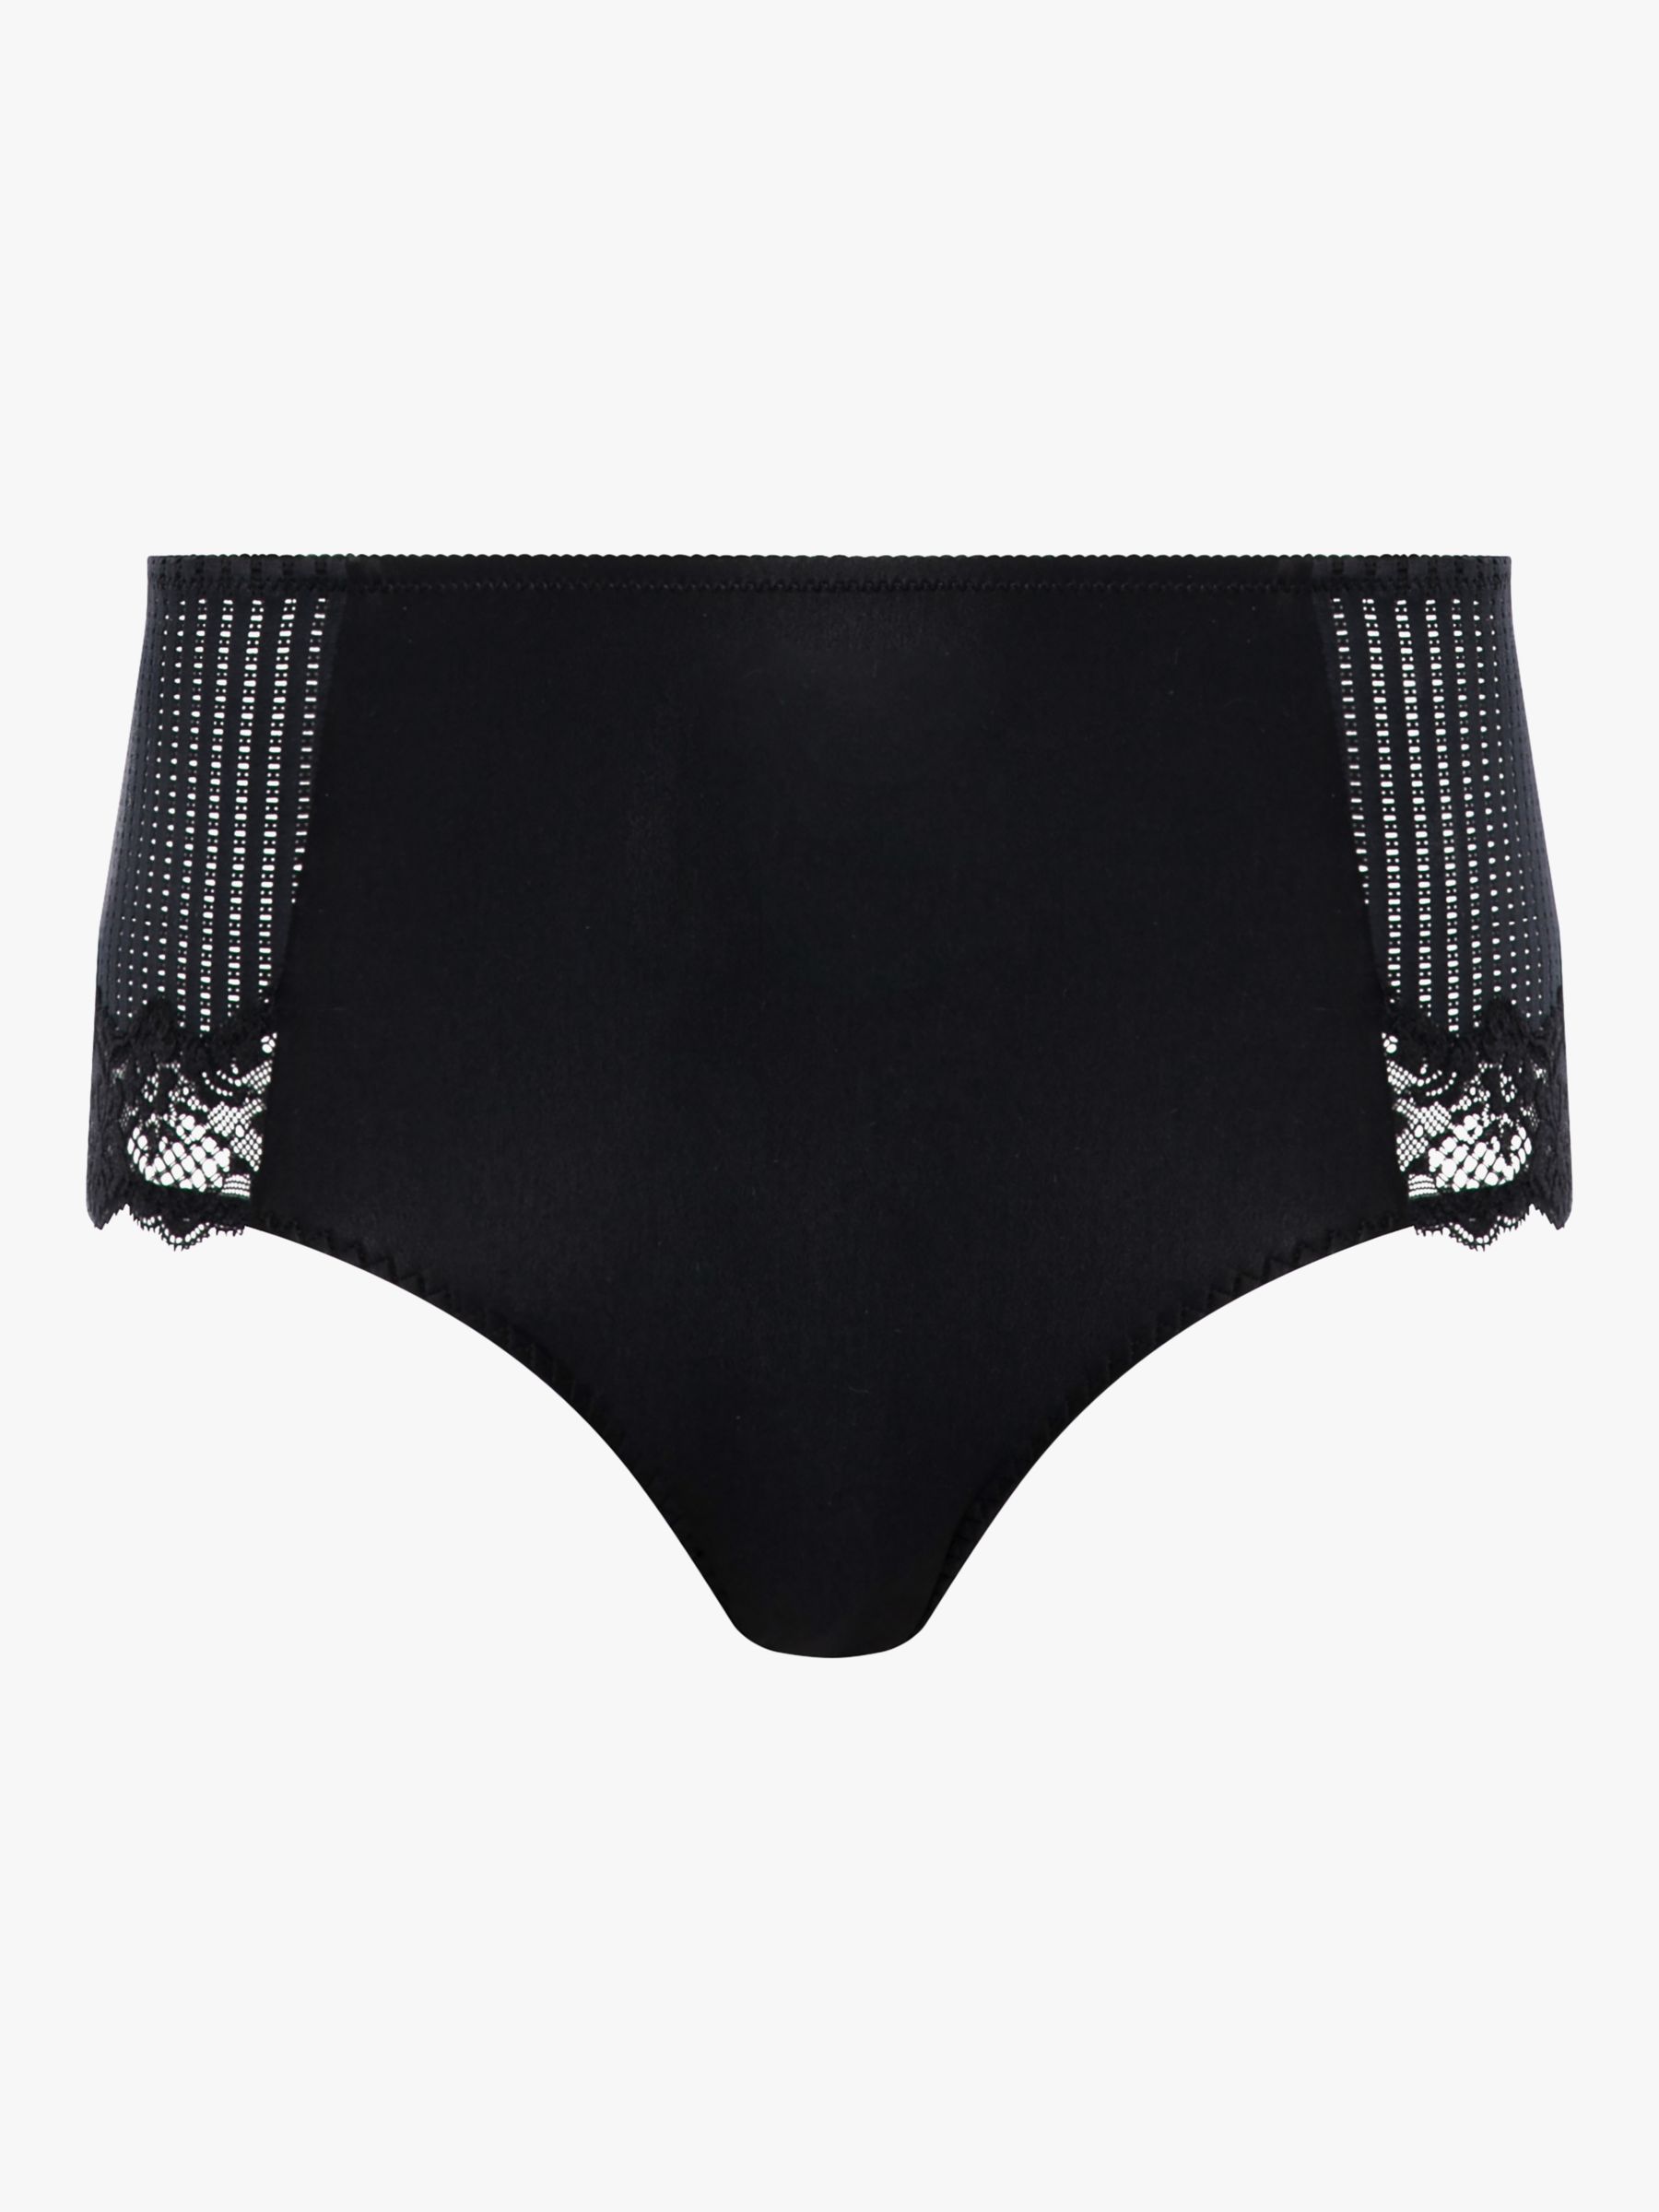 Buy Chantelle Marilyn Soft Feel High Waisted Knickers Online at johnlewis.com